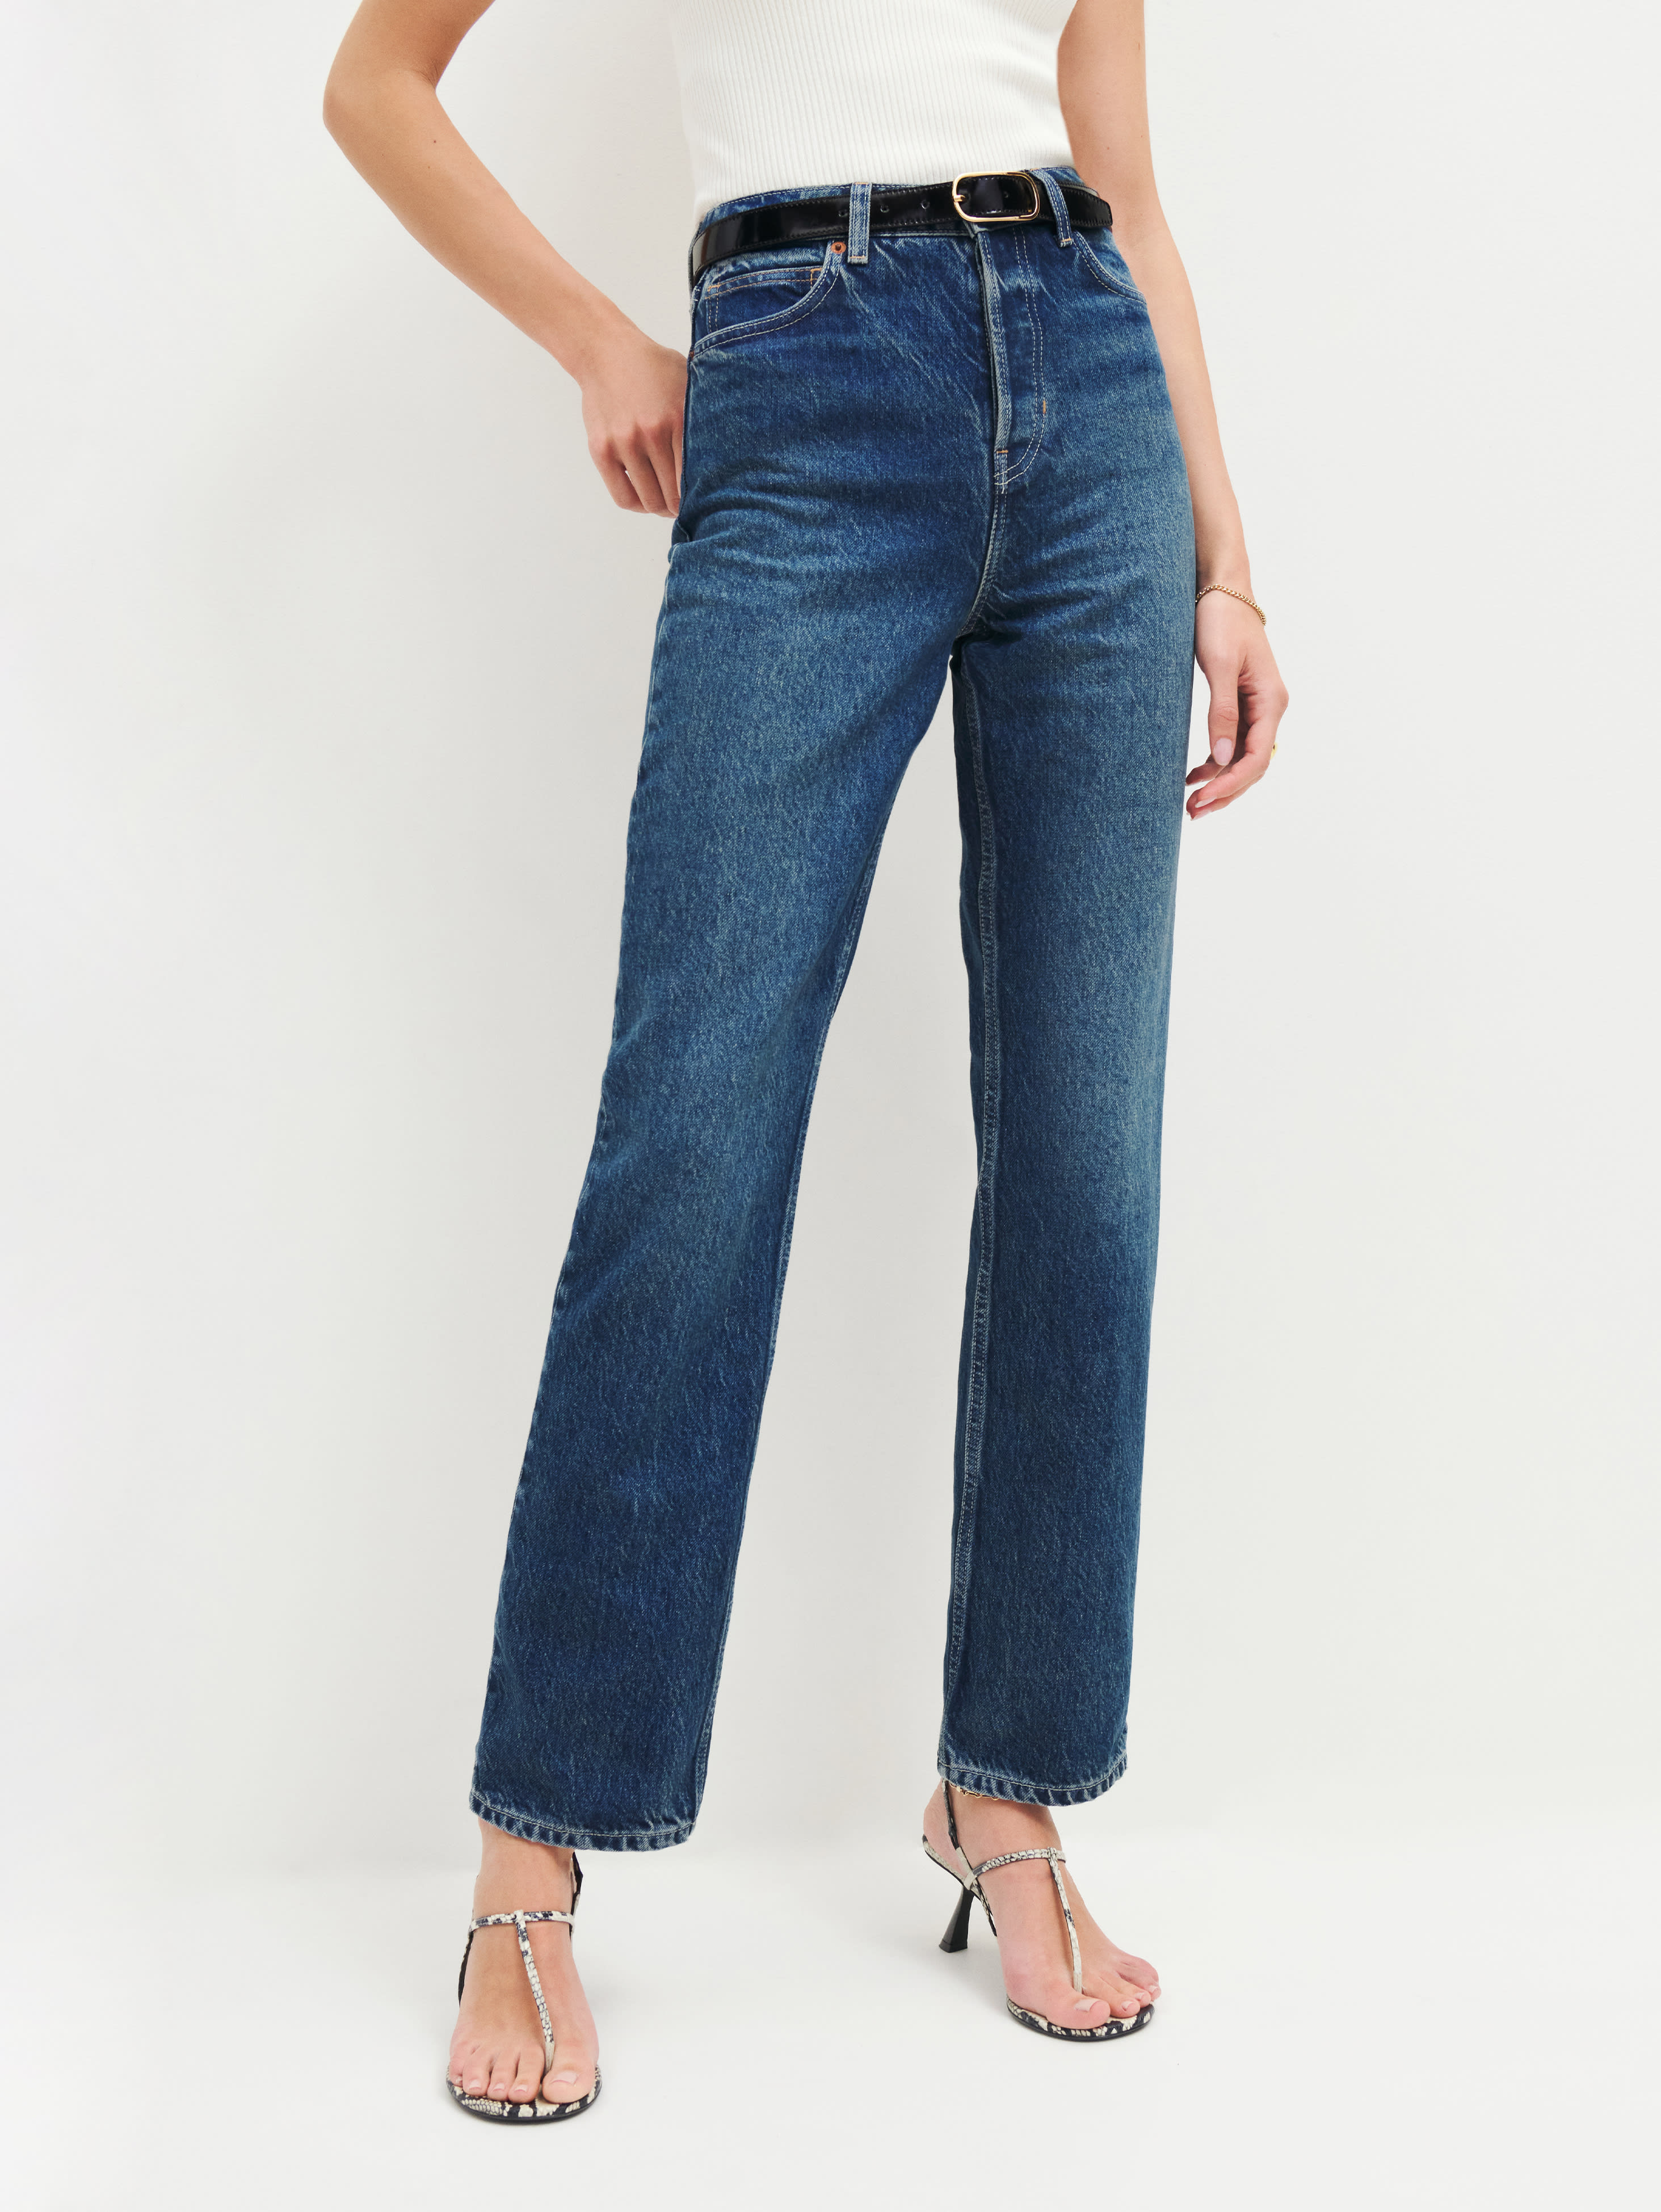 Reformation Cynthia High Rise Straight Jeans In Lanier